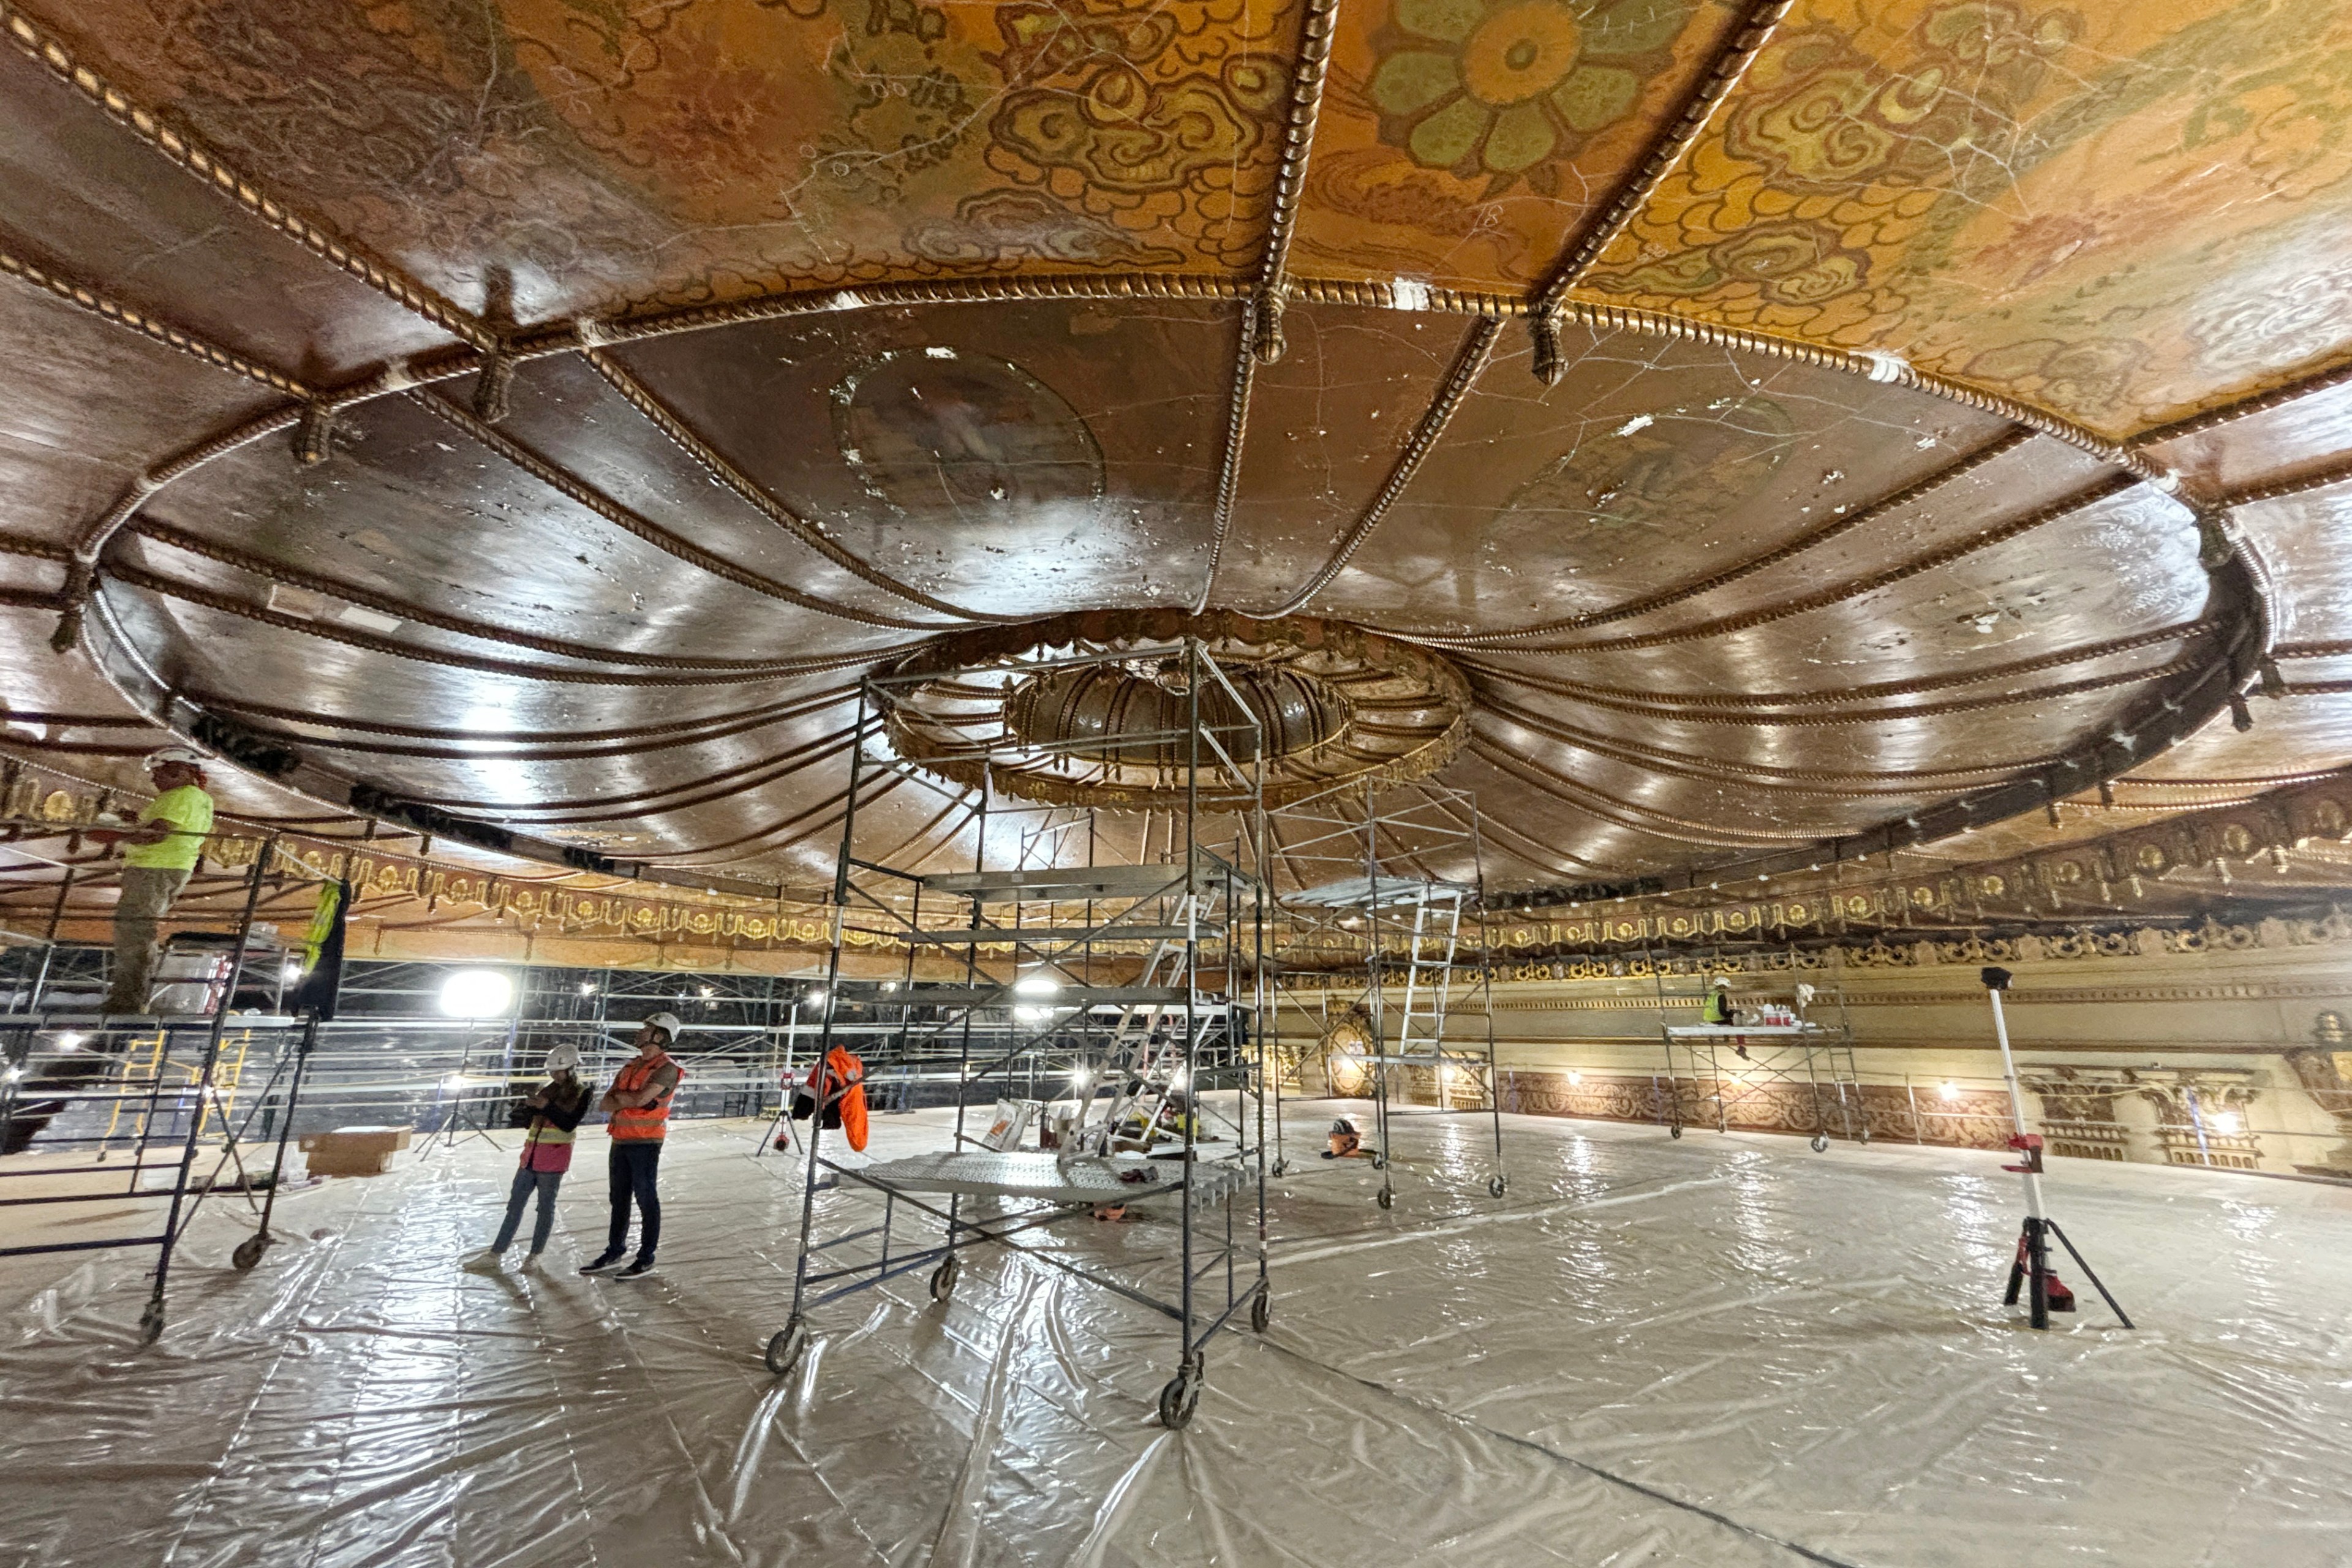 a zoomed-out image of a platform in the Castro Theatre showing people at work and the ceiling where the chandelier will go once it's restored.